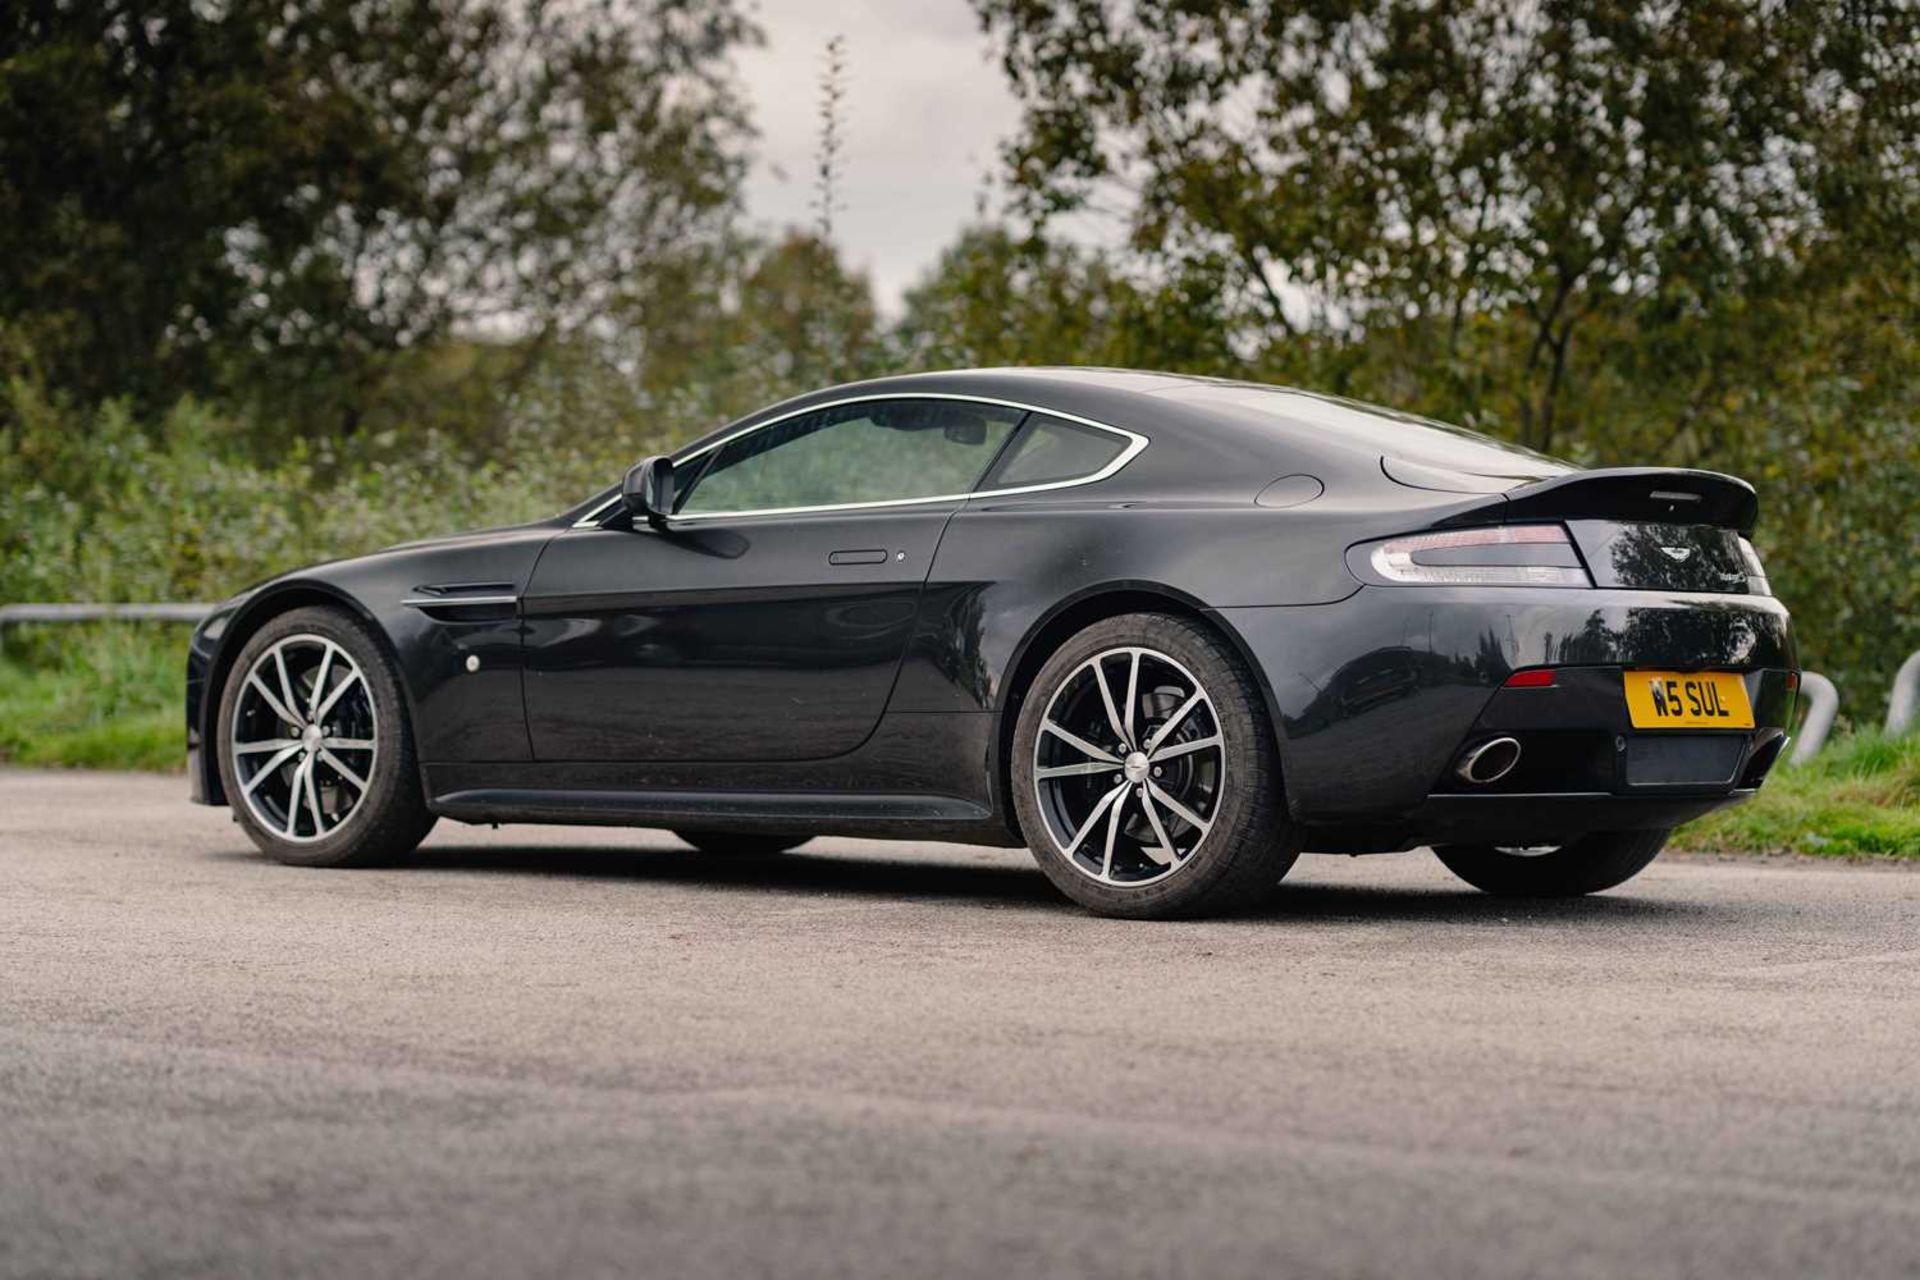 2013 Aston Martin Vantage S SP10 Warranted 15,600 miles from new - Image 7 of 60